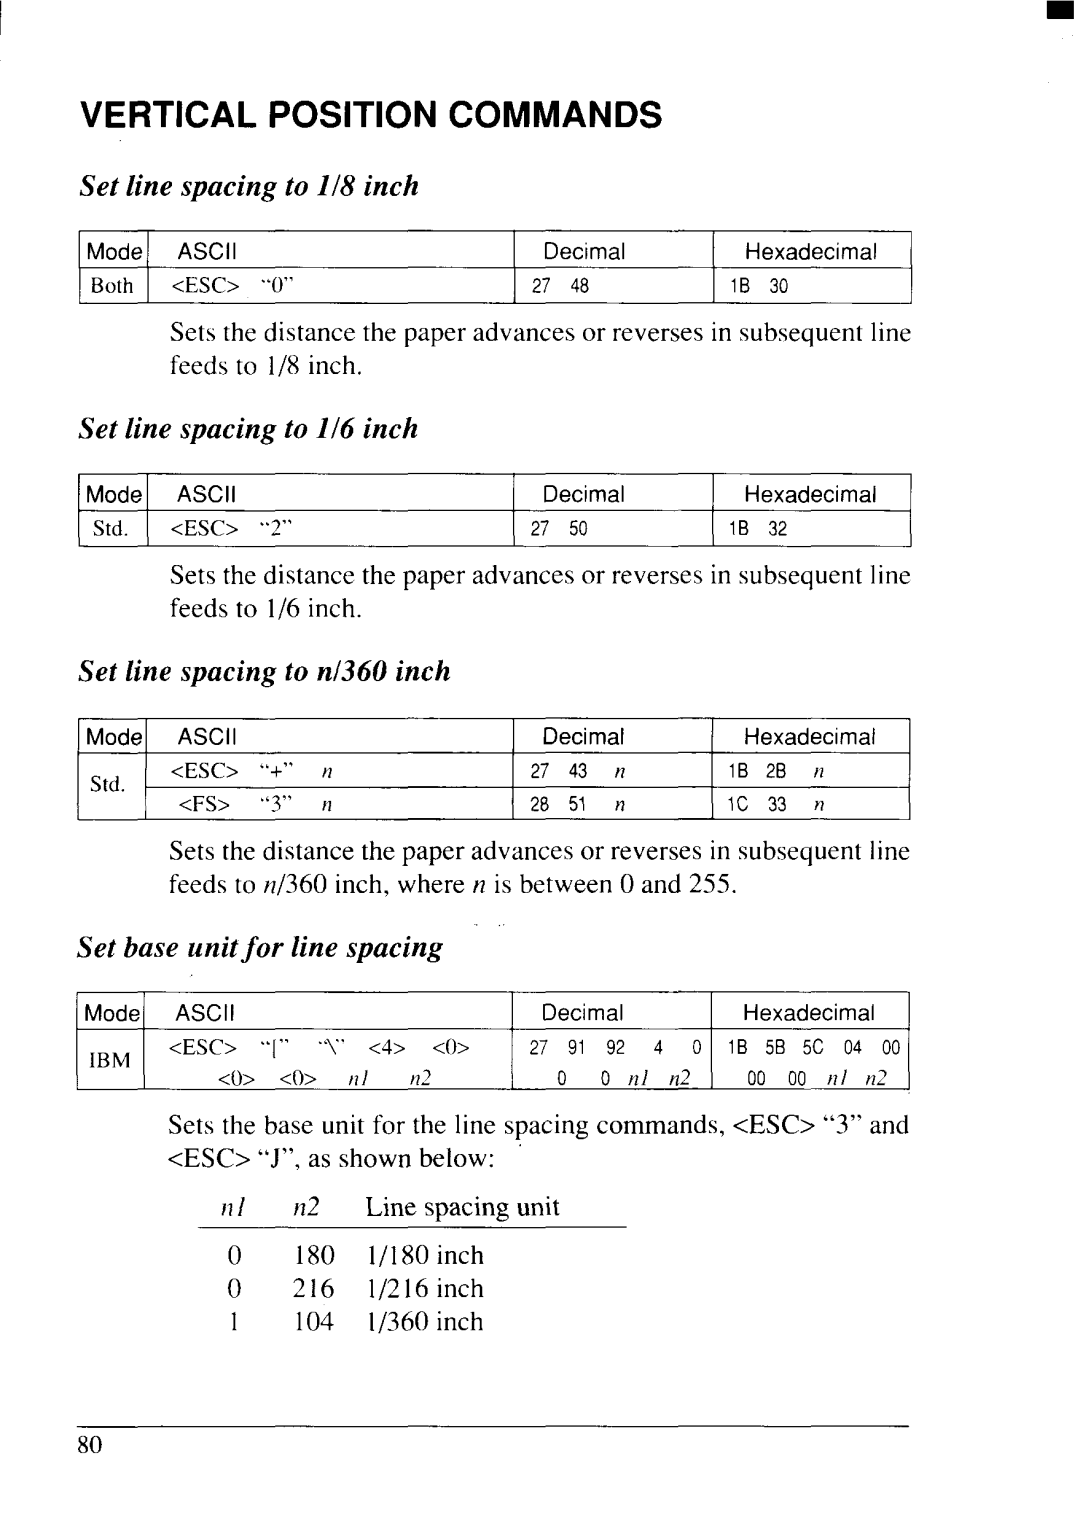 Star Micronics NX-2415II user manual Verticalcommands, Set line spacing to 1/8 inch, Set line spacing to 1/6 inch 